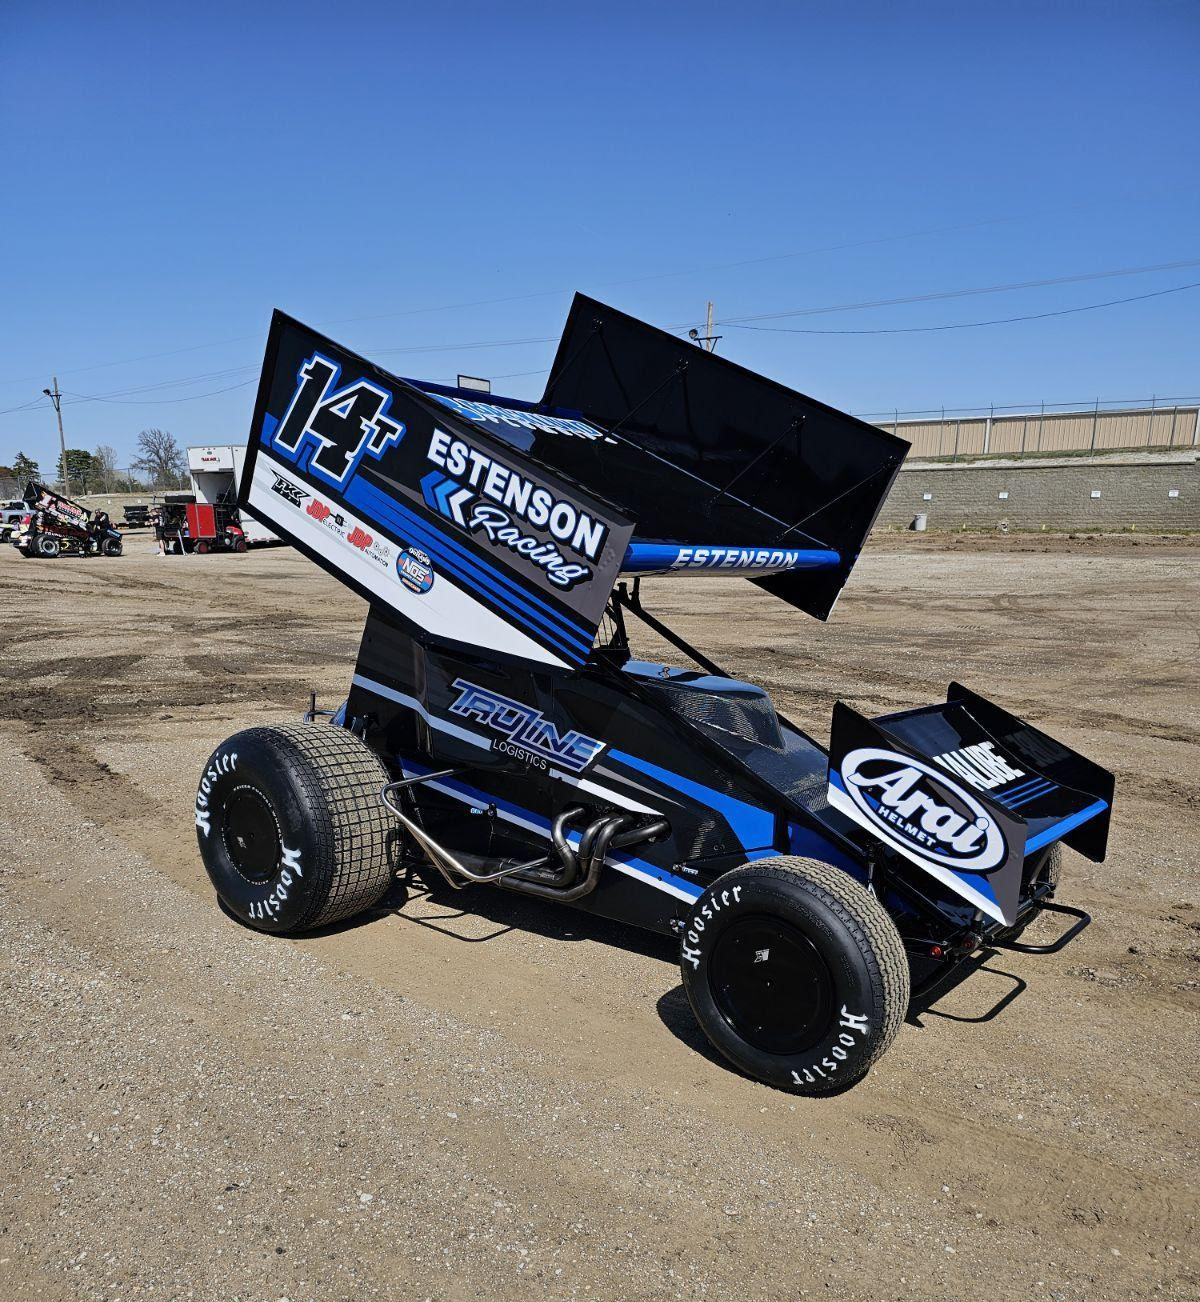 Tim Estenson’s Busy Racing Week: World of Outlaws and IRA Outlaw Sprint Series